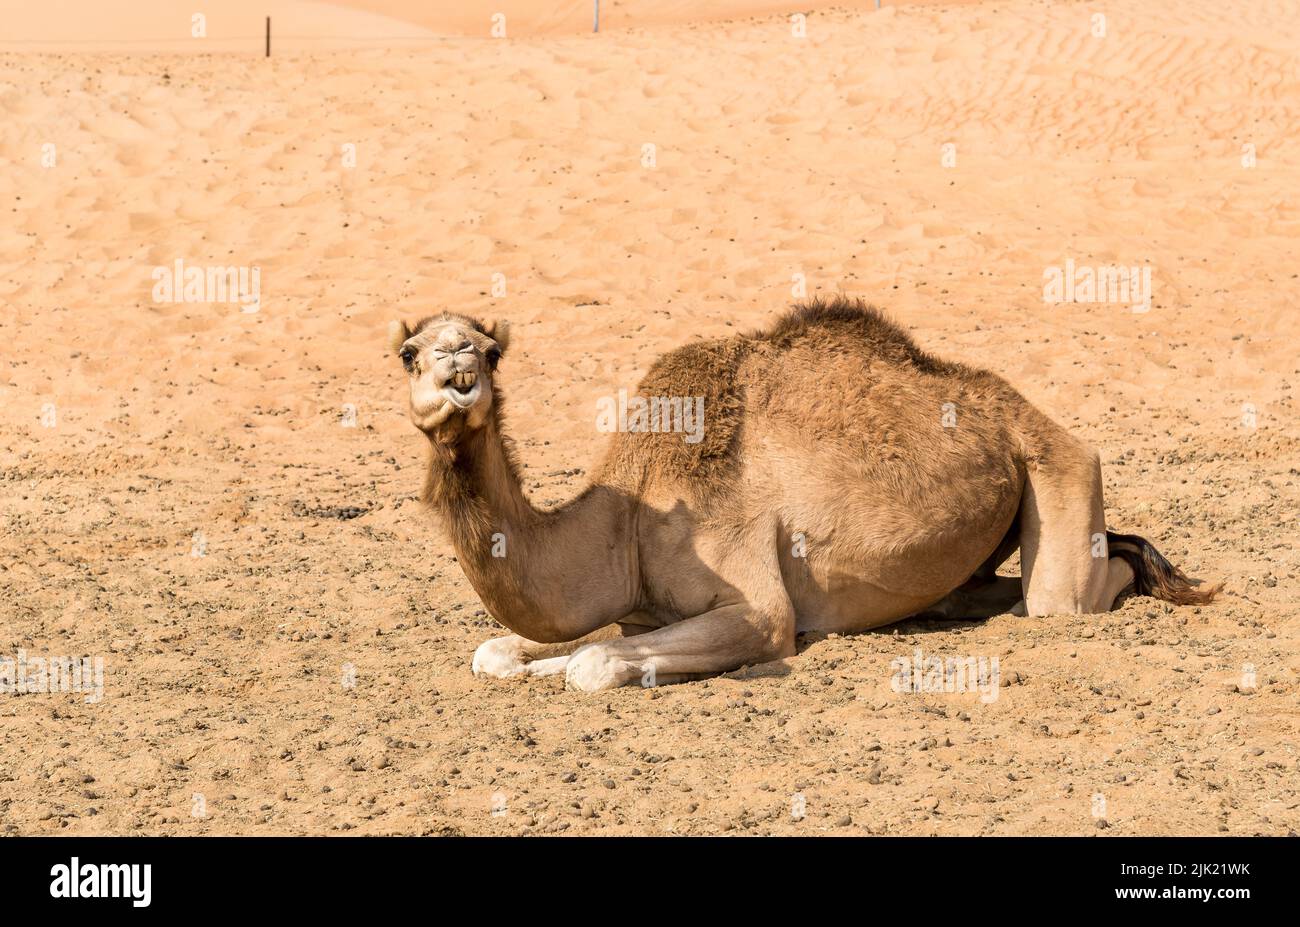 The Middle Eastern camel resting on the sand in the Wahiba Sands of desert in Oman. Stock Photo